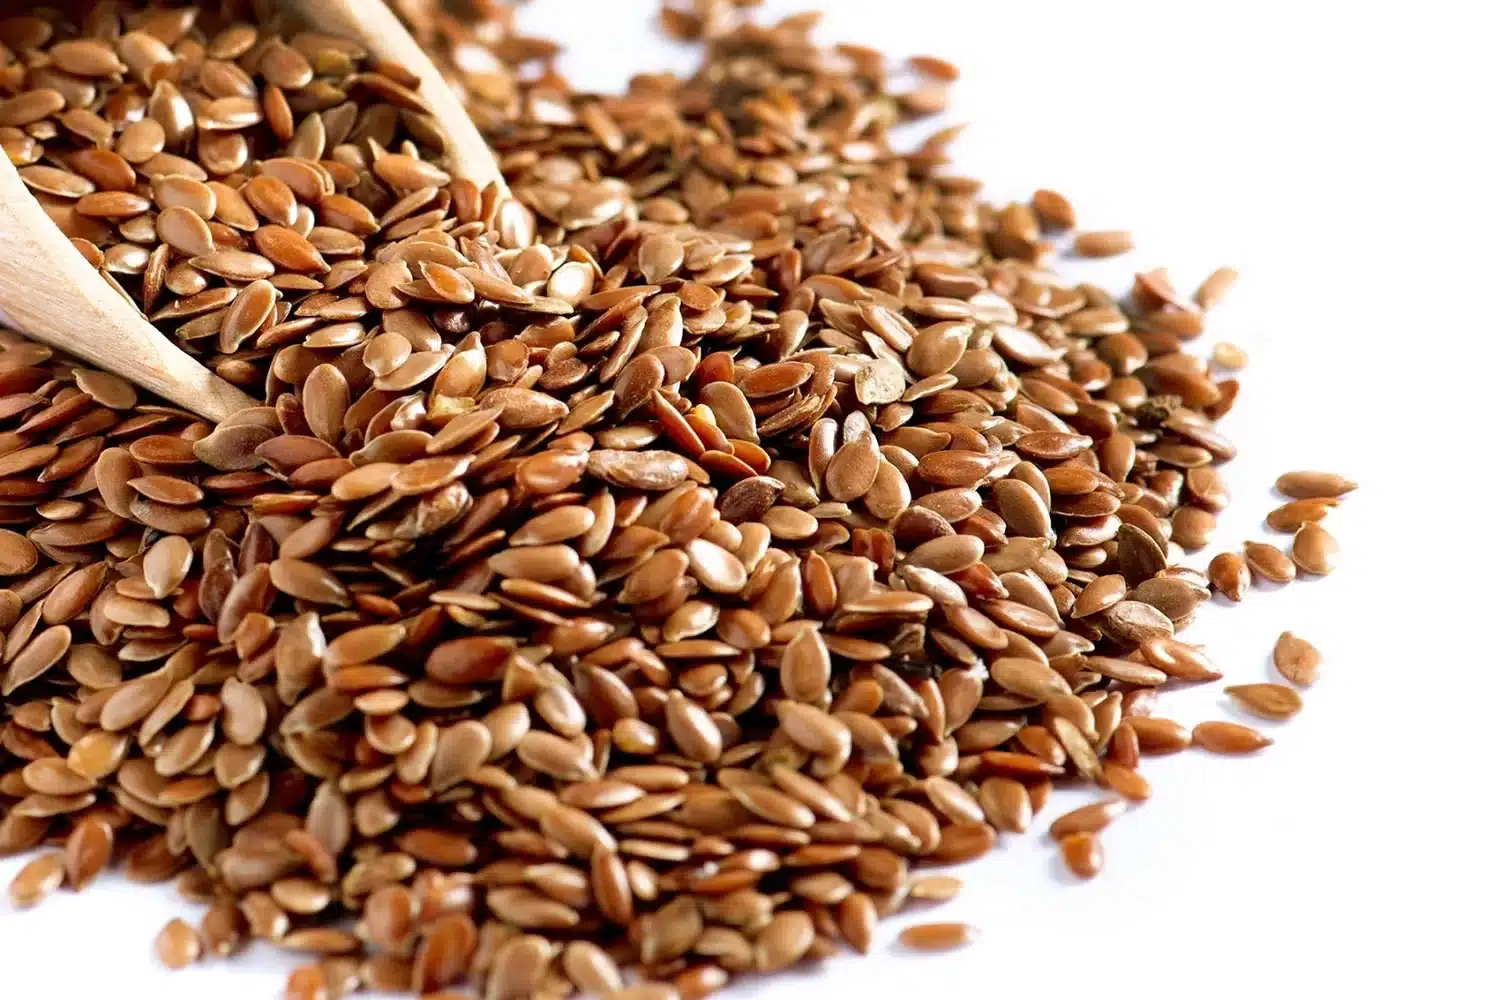 get-the-most-out-of-your-flax-seeds-by-grinding-them-yourself